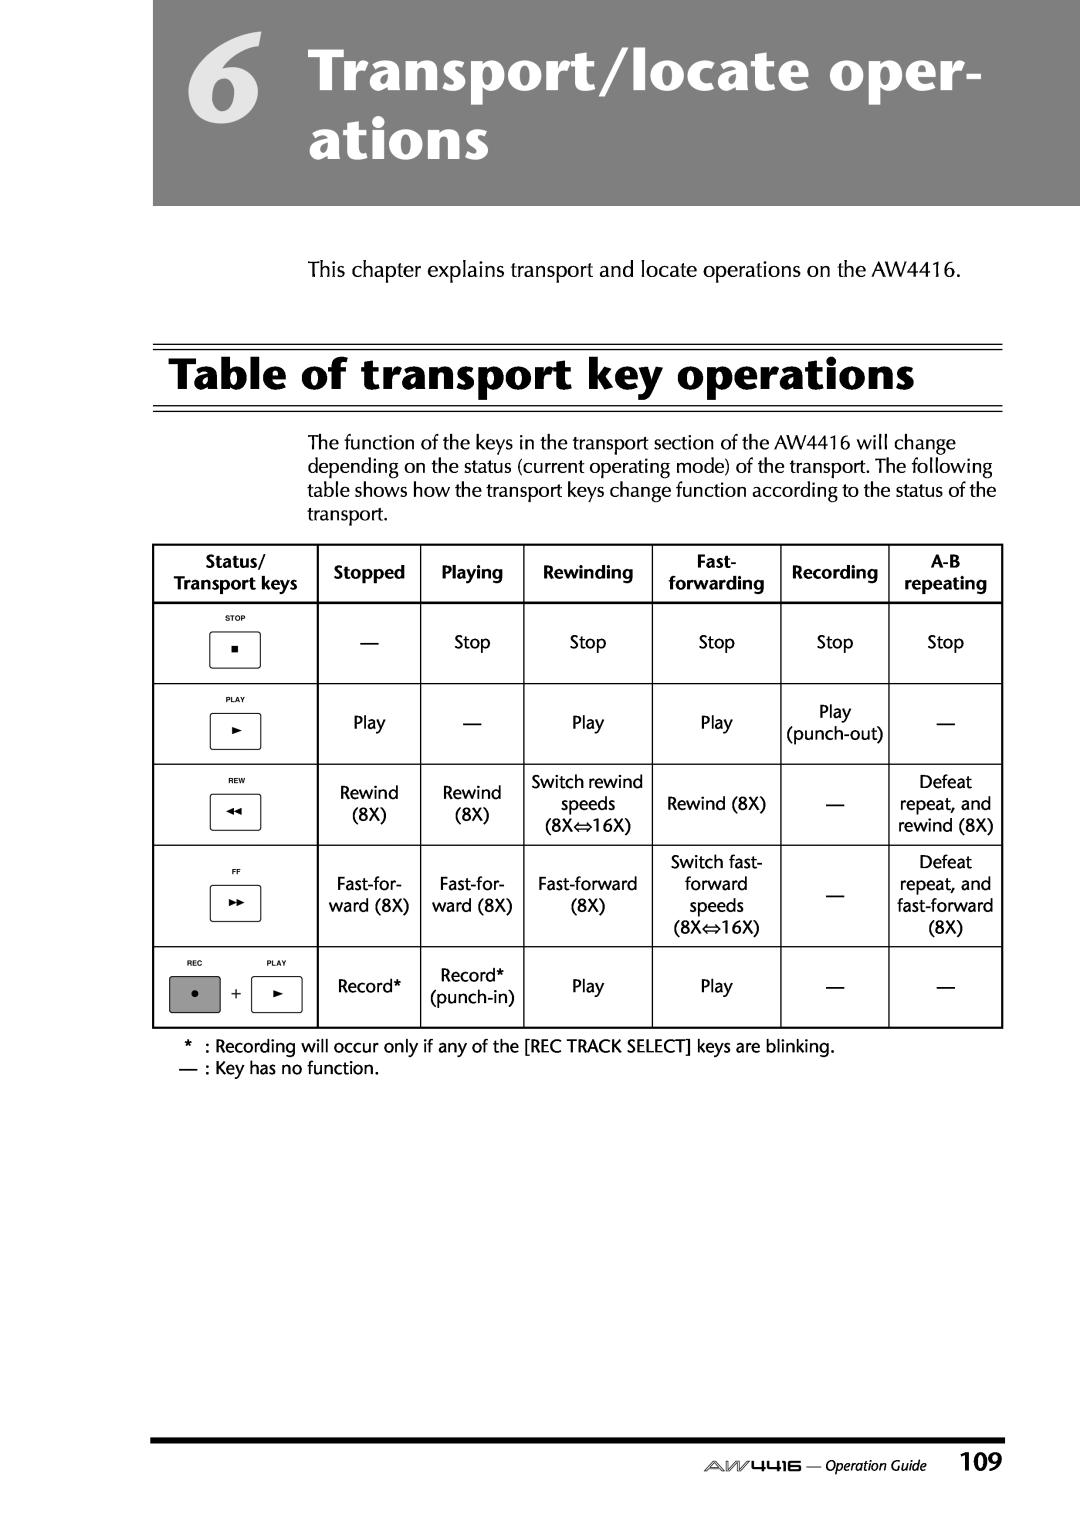 Yamaha AW4416 manual Transport/locateations oper, Table of transport key operations 